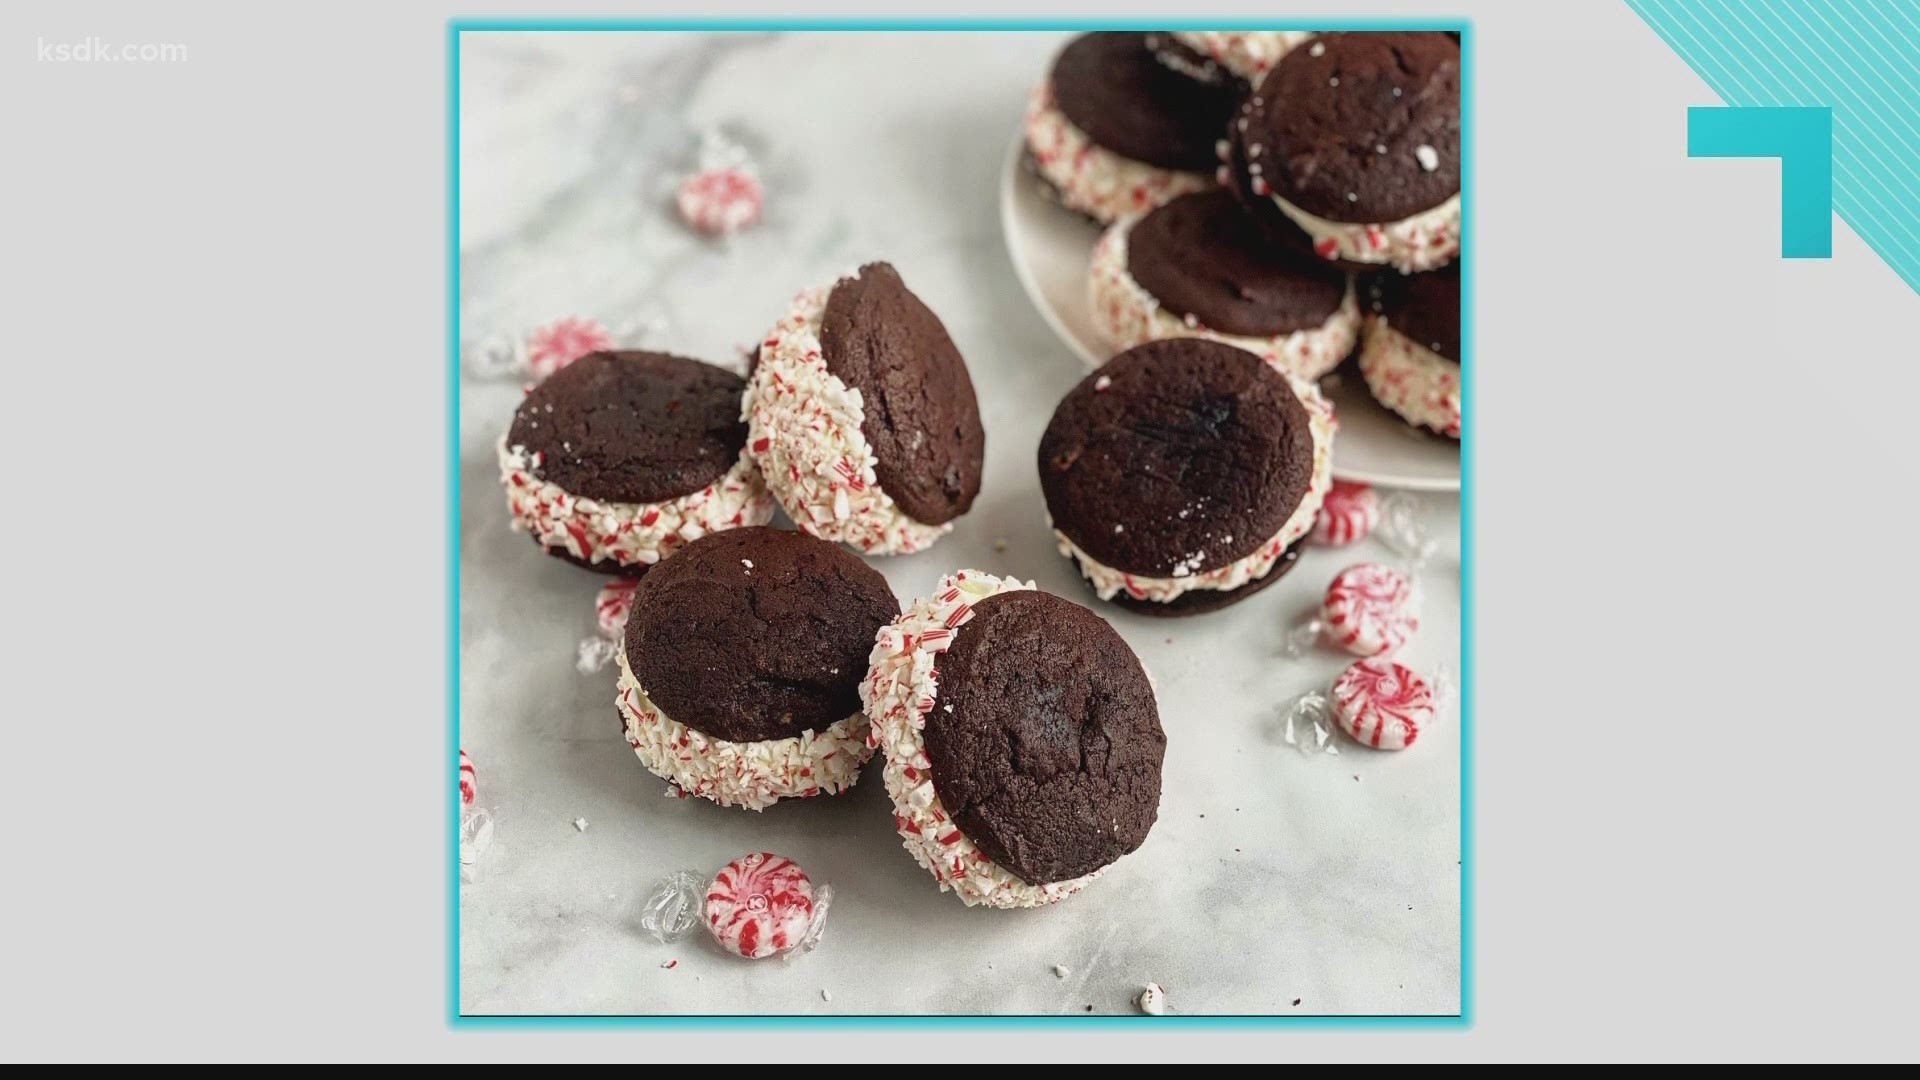 You might have seen her baking videos on TikTok. Jessie Sheehan shares how to make Peppermint Chocolate Whoopie Pies.